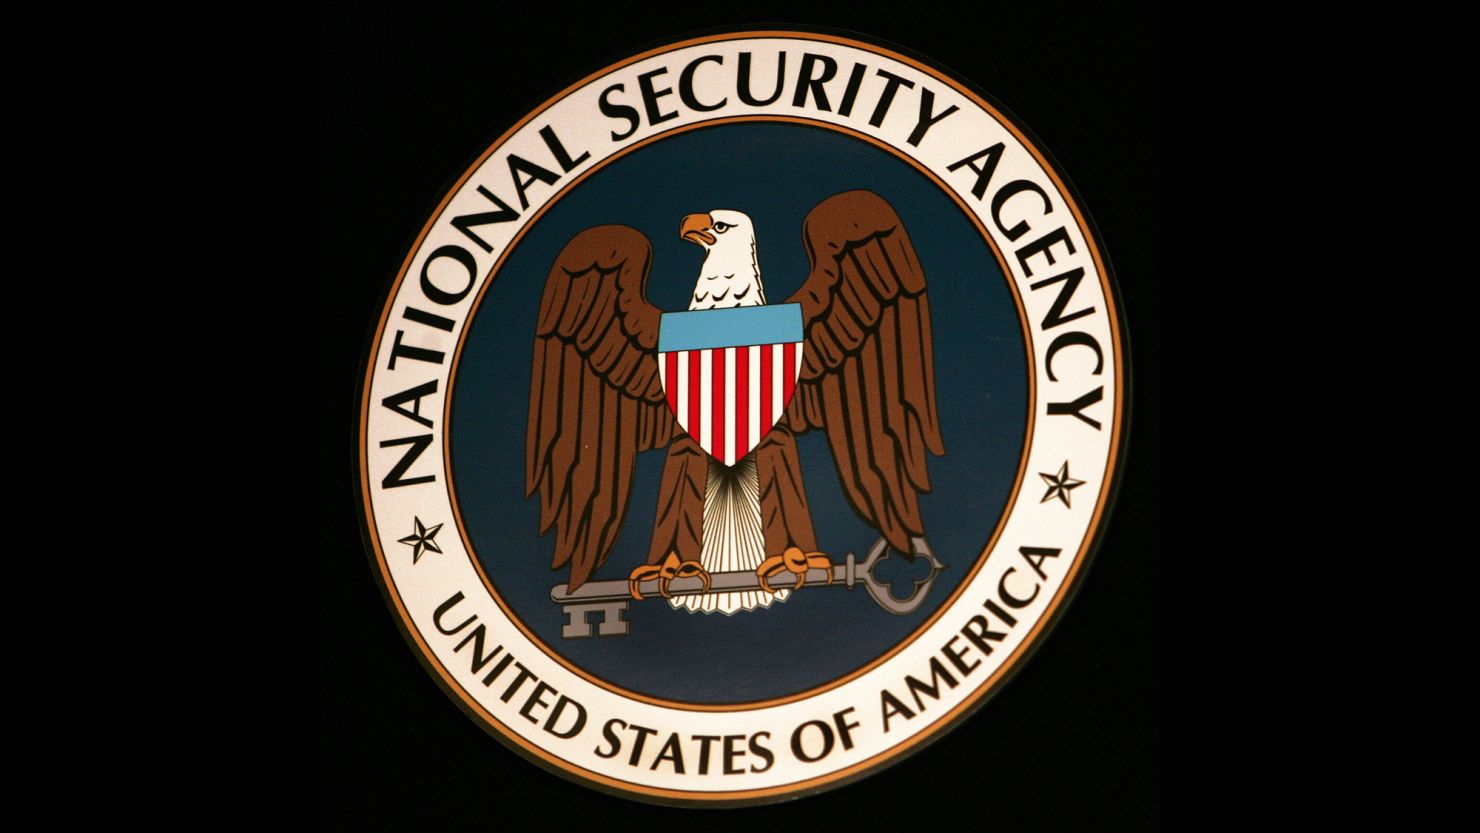 An independent government review board released a report on a National Security Agency program, saying it has the potential to infringe on the privacy rights of U.S. citizens.